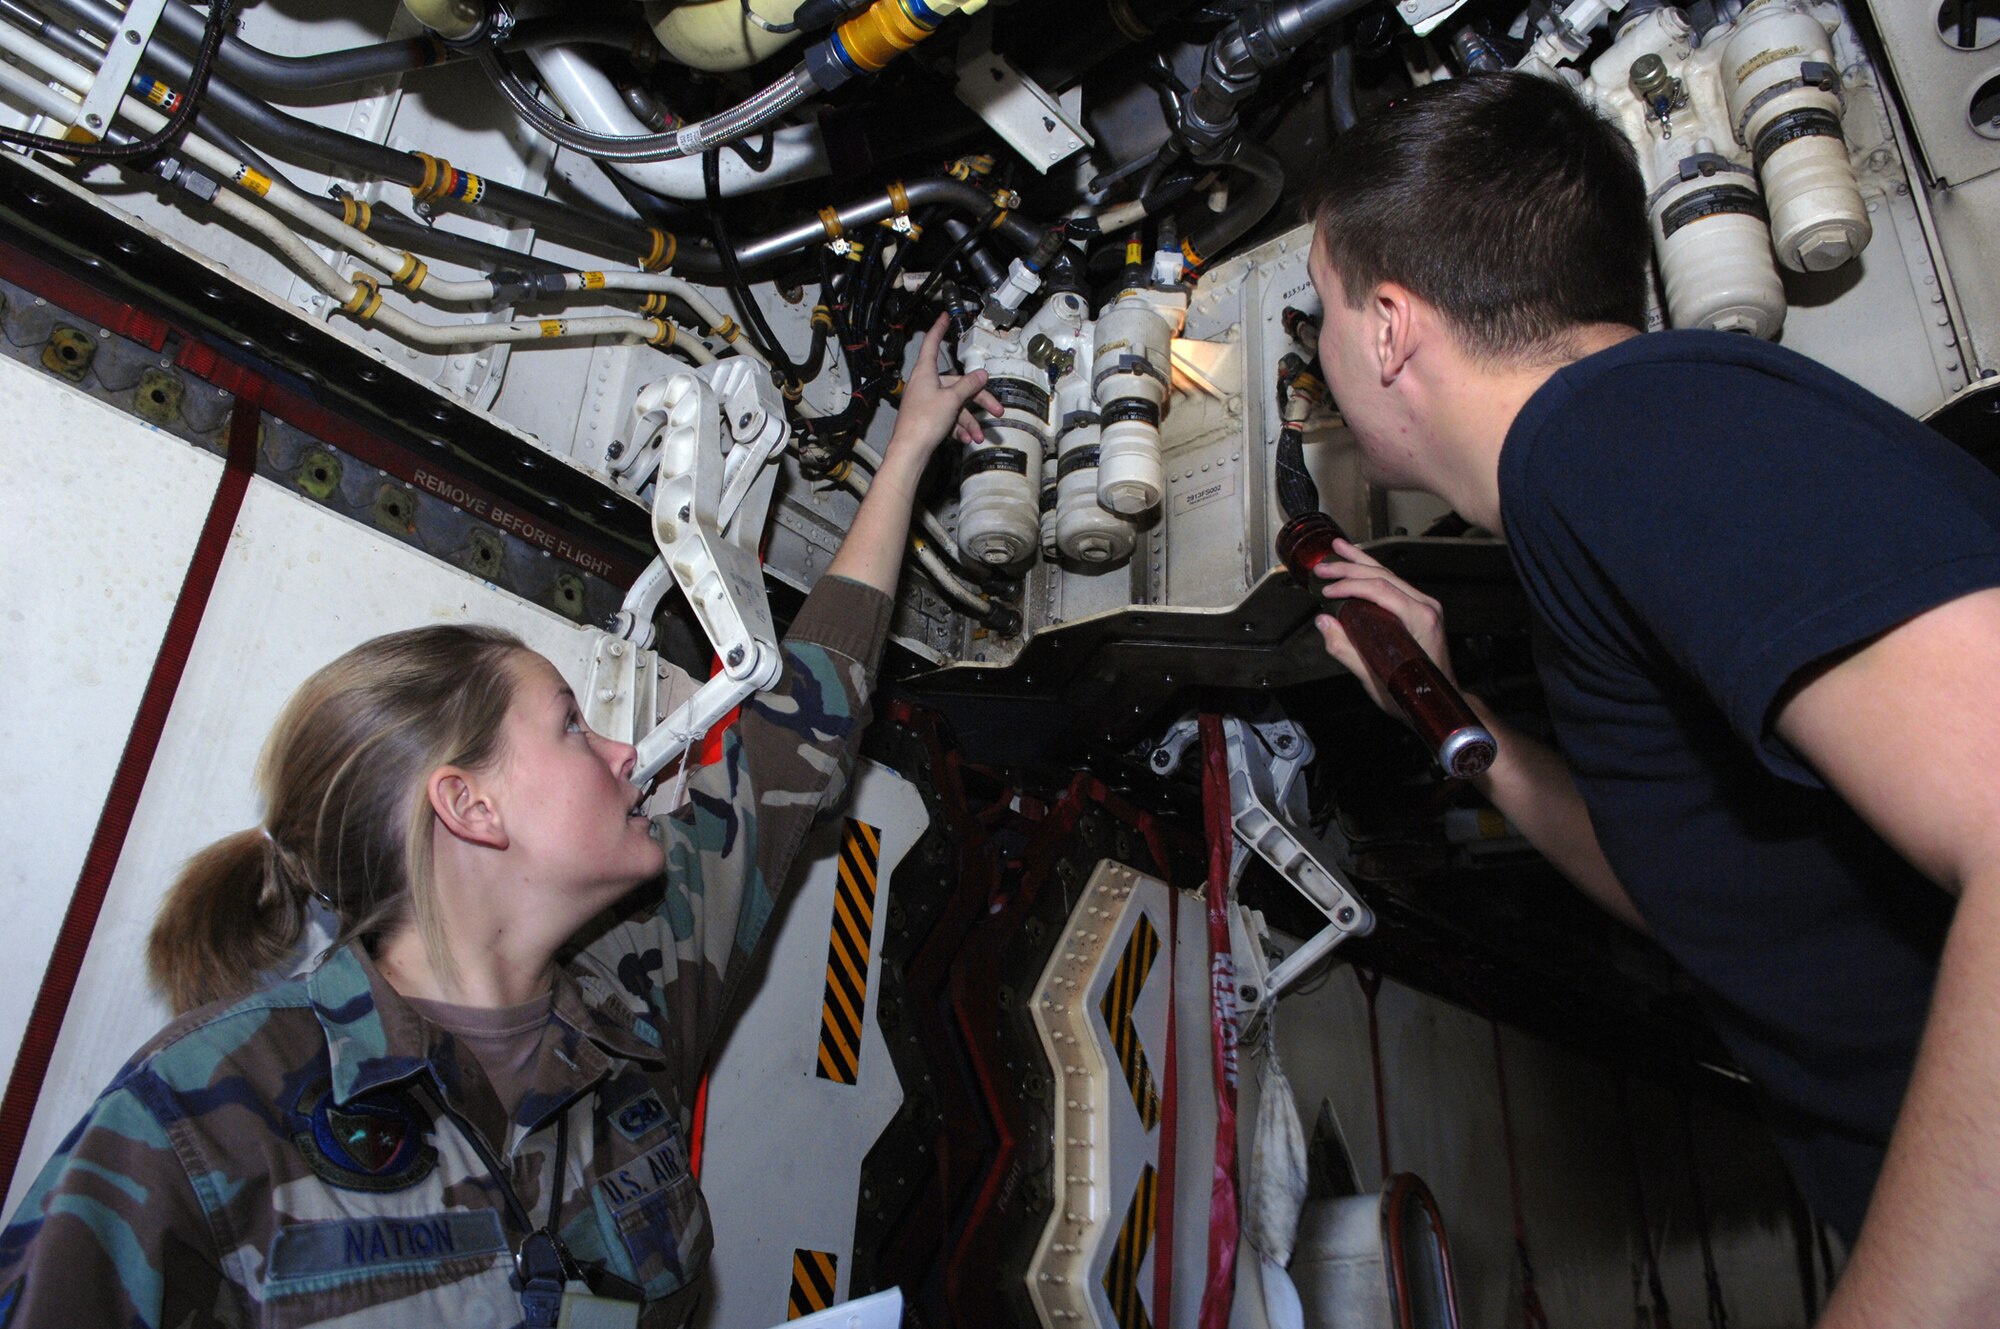 WHITEMAN AIR FORCE BASE, Mo. – Airmen 1st Class Lacey Nations and Jamie Forkner from the 509th Aircraft Maintenance Squadron, perform an hourly post inspection on the Spirit of Pennsylvania. (U.S. Air Force photo/Airman 1st Class Stephen Linch)